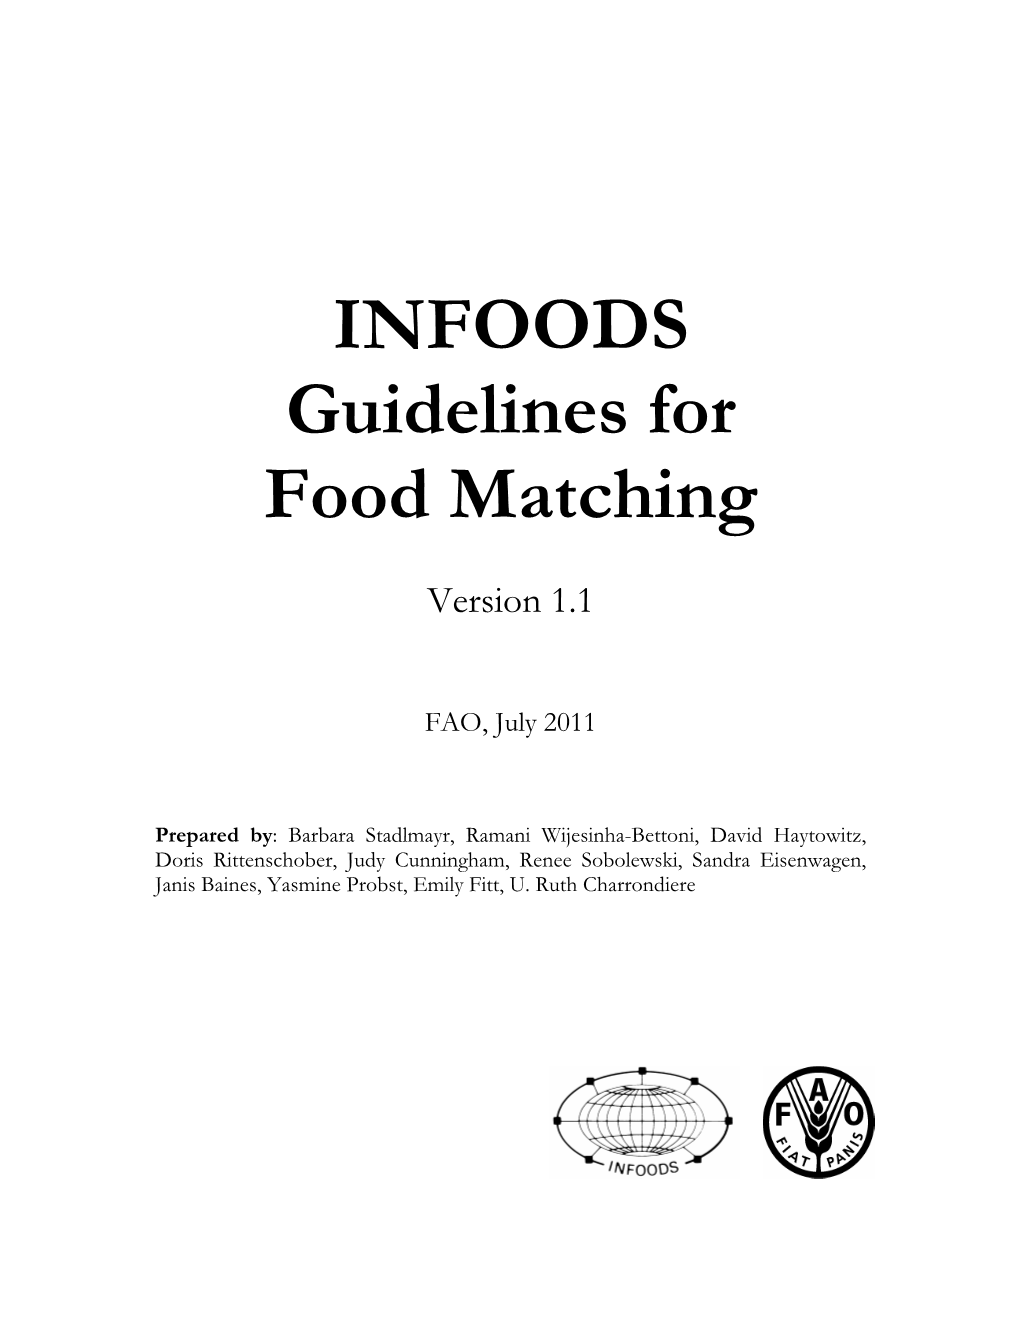 FAO/INFOODS Guidelines for Food Matching